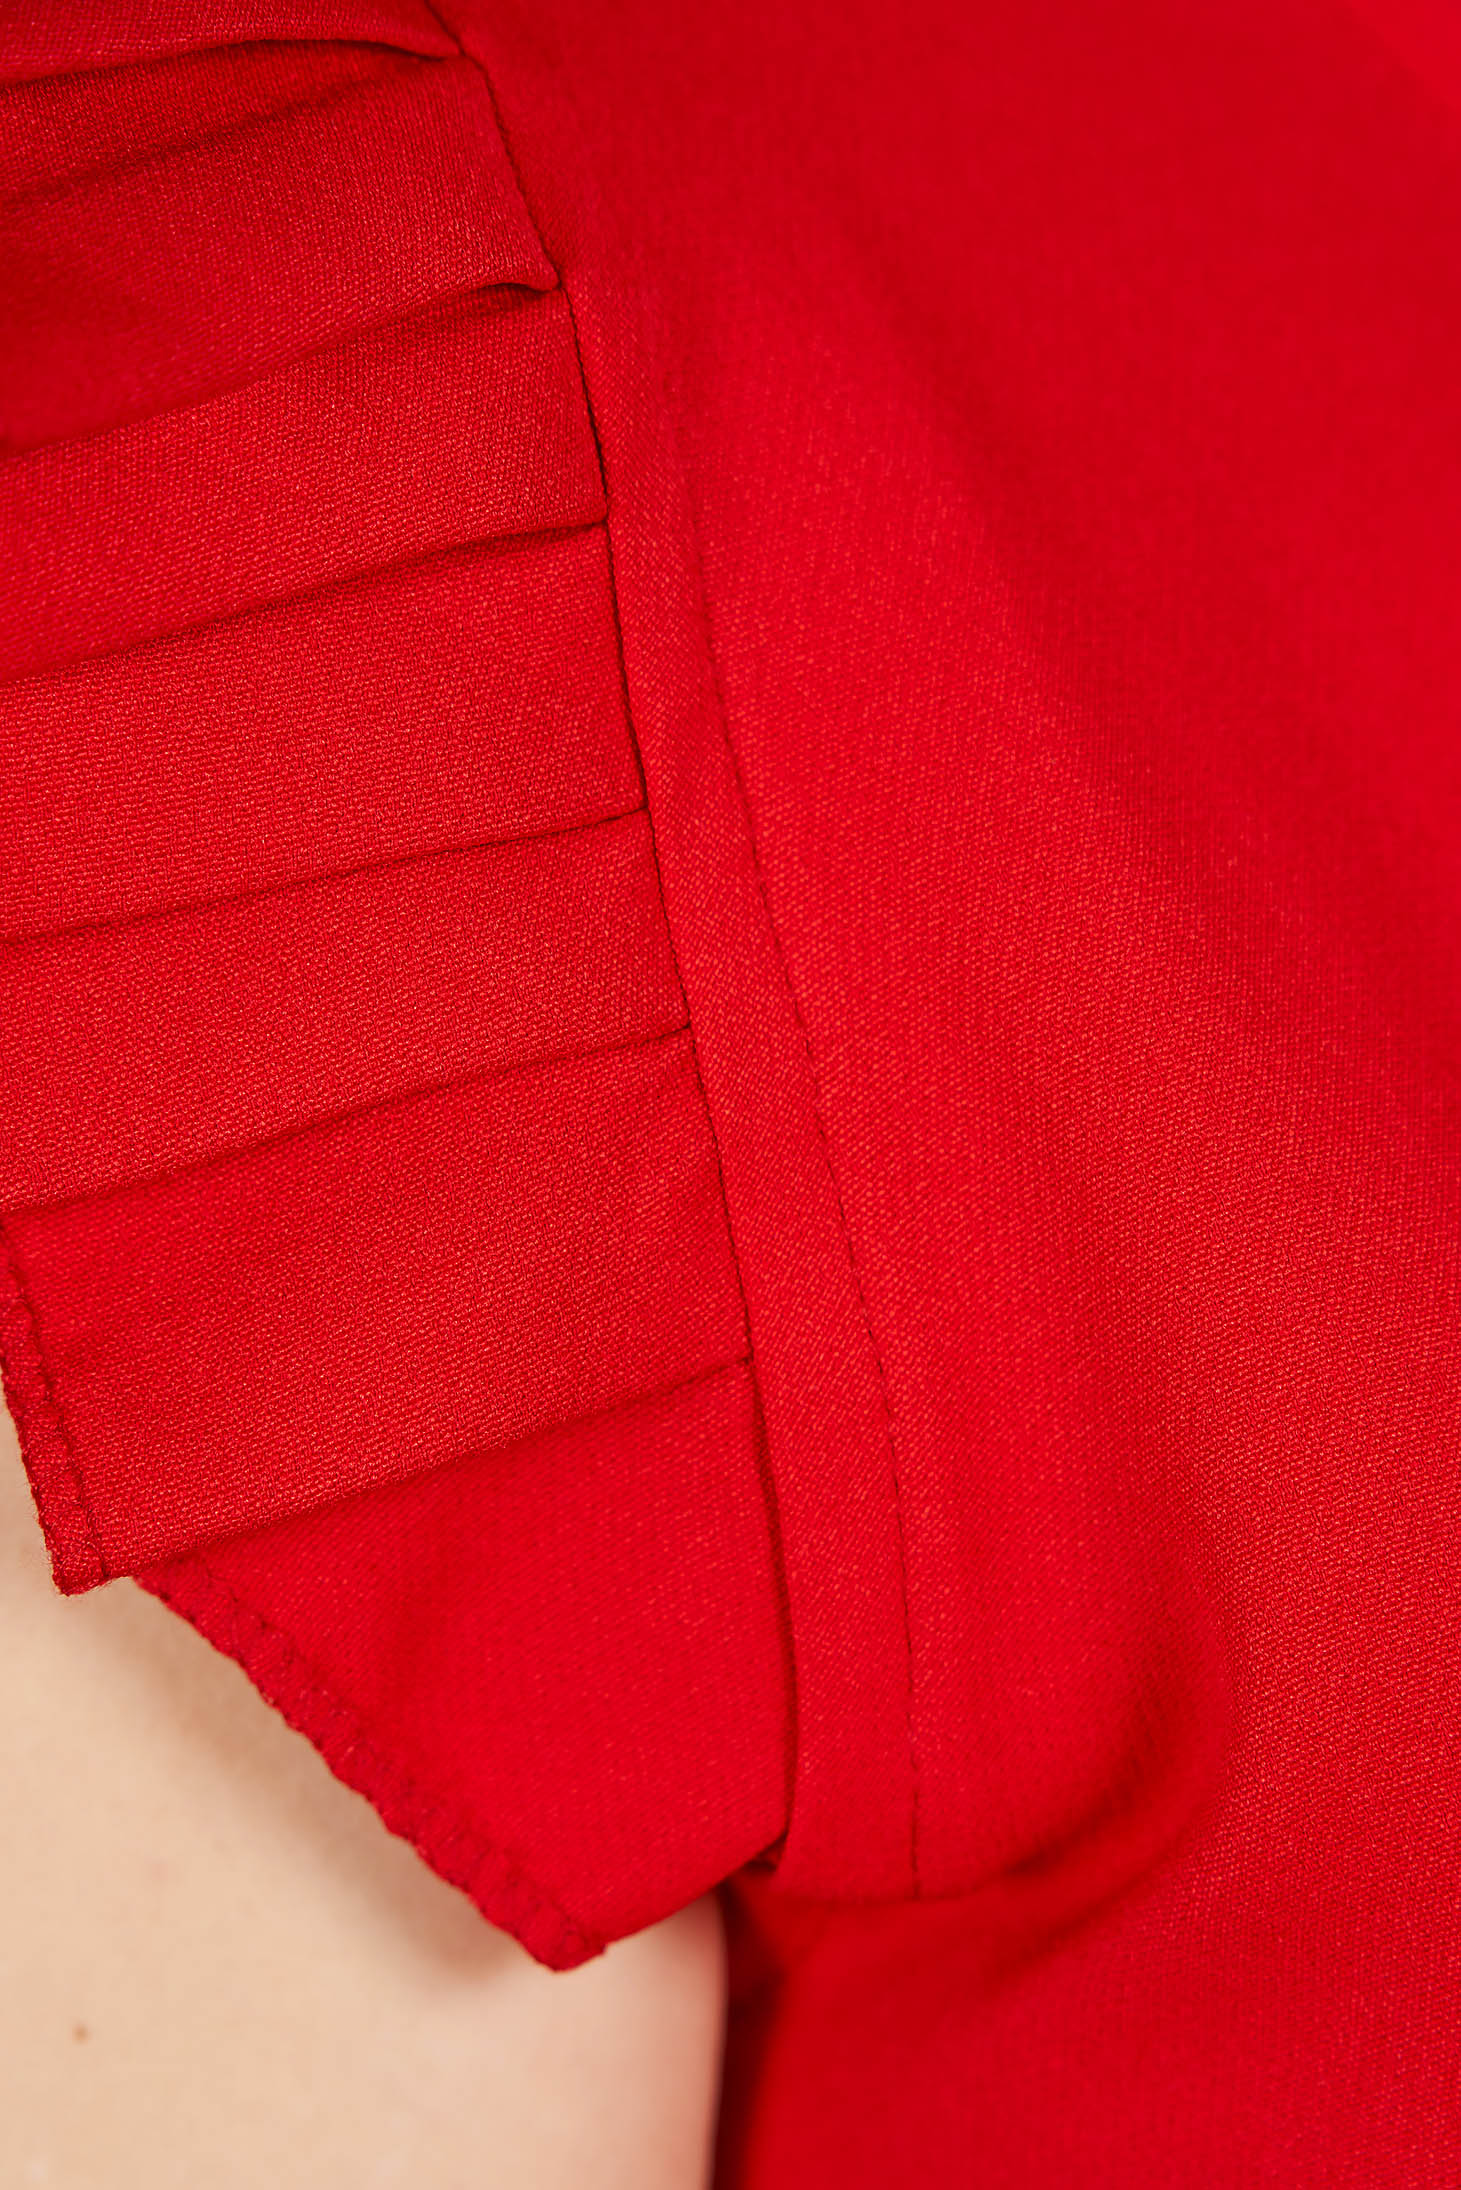 Red dress daily short cut flared short sleeves with rounded cleavage 4 - StarShinerS.com